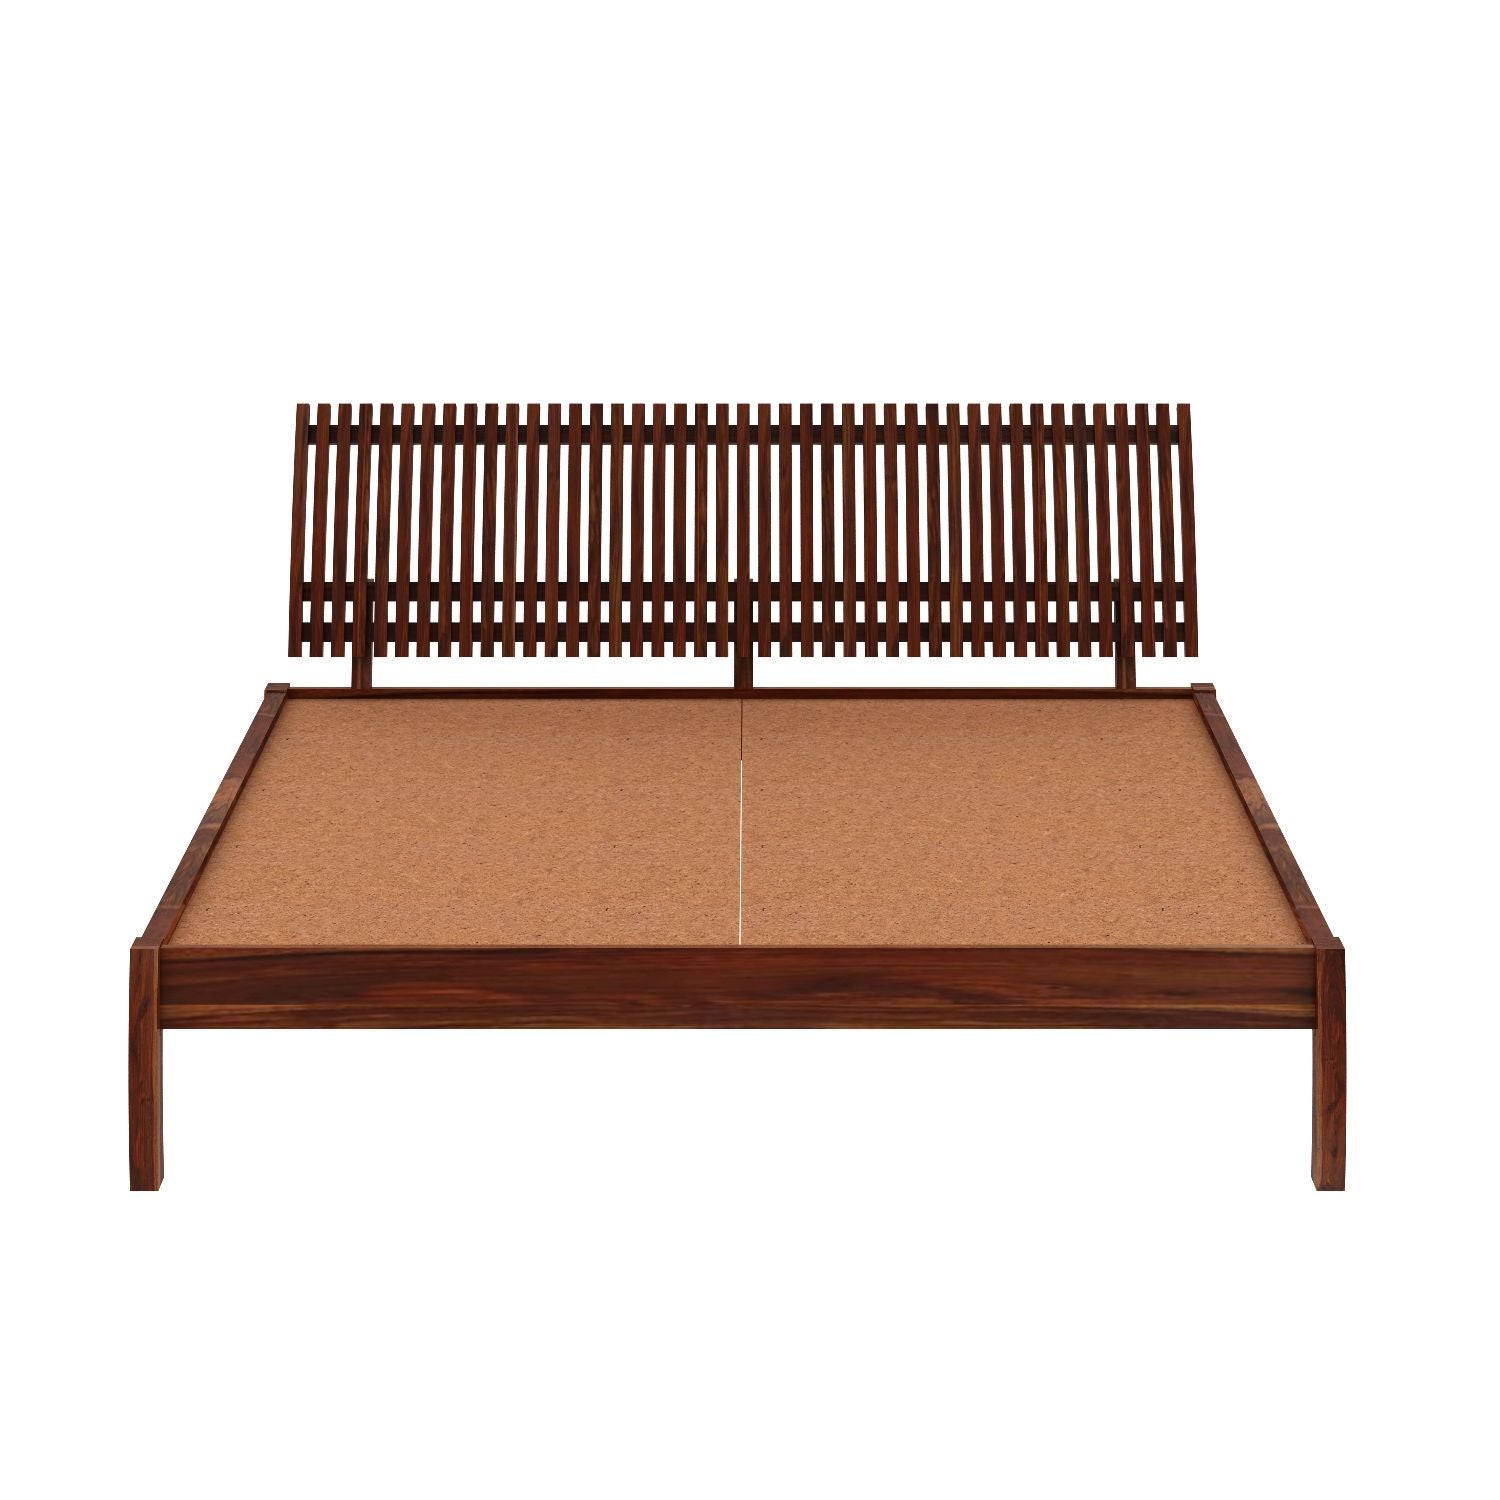 Dumdum Solid Sheesham Wood Bed Without Storage (Queen Size, Natural Finish)